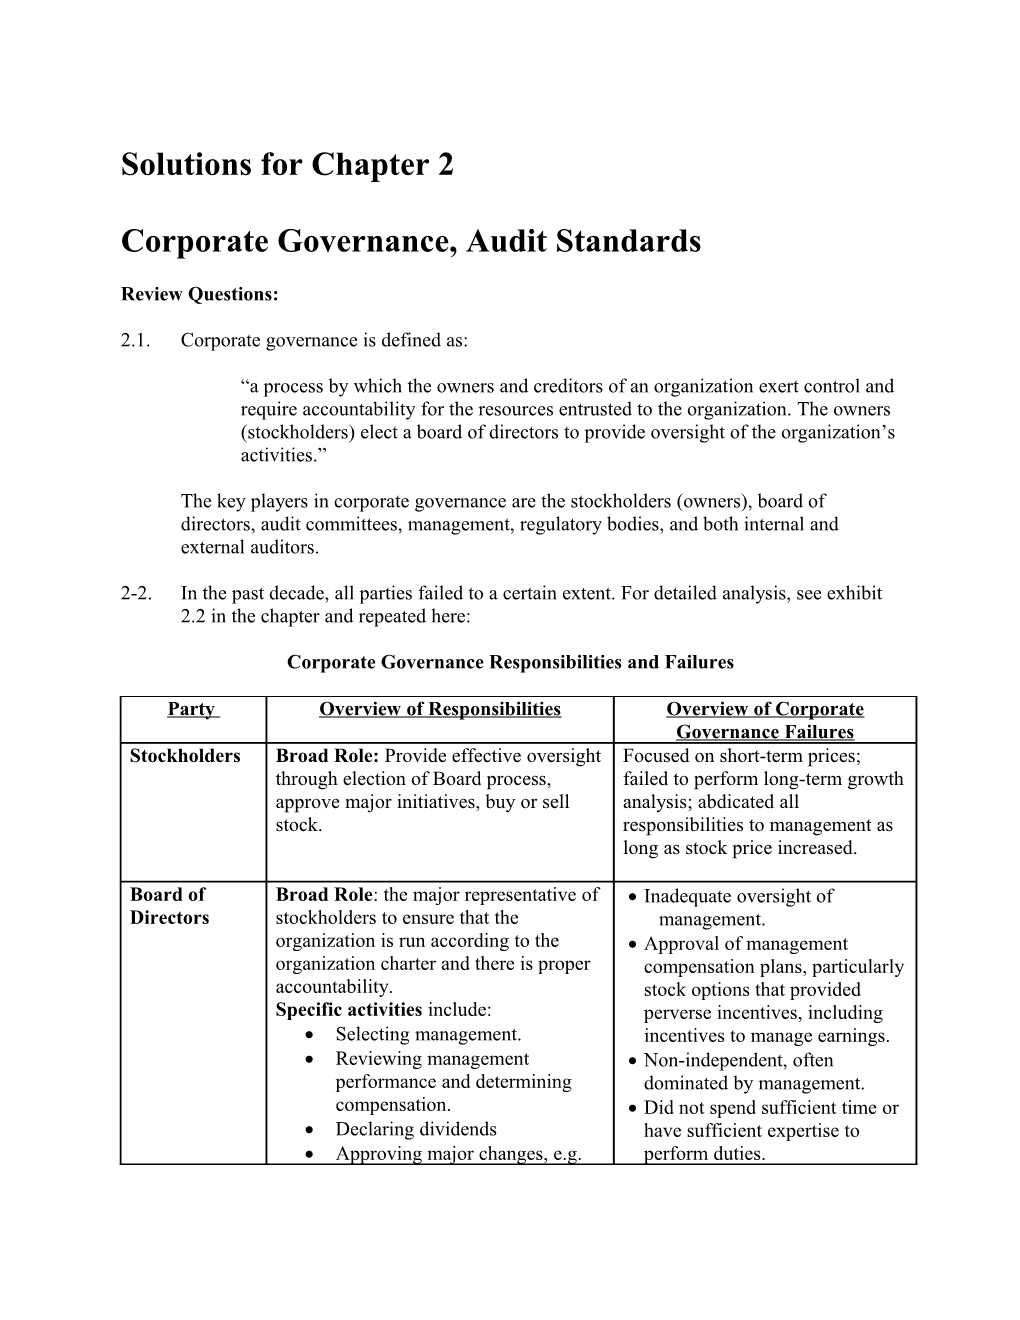 Solutions for Chapter 2 Corporate Governance, Auditing Standards 2-1